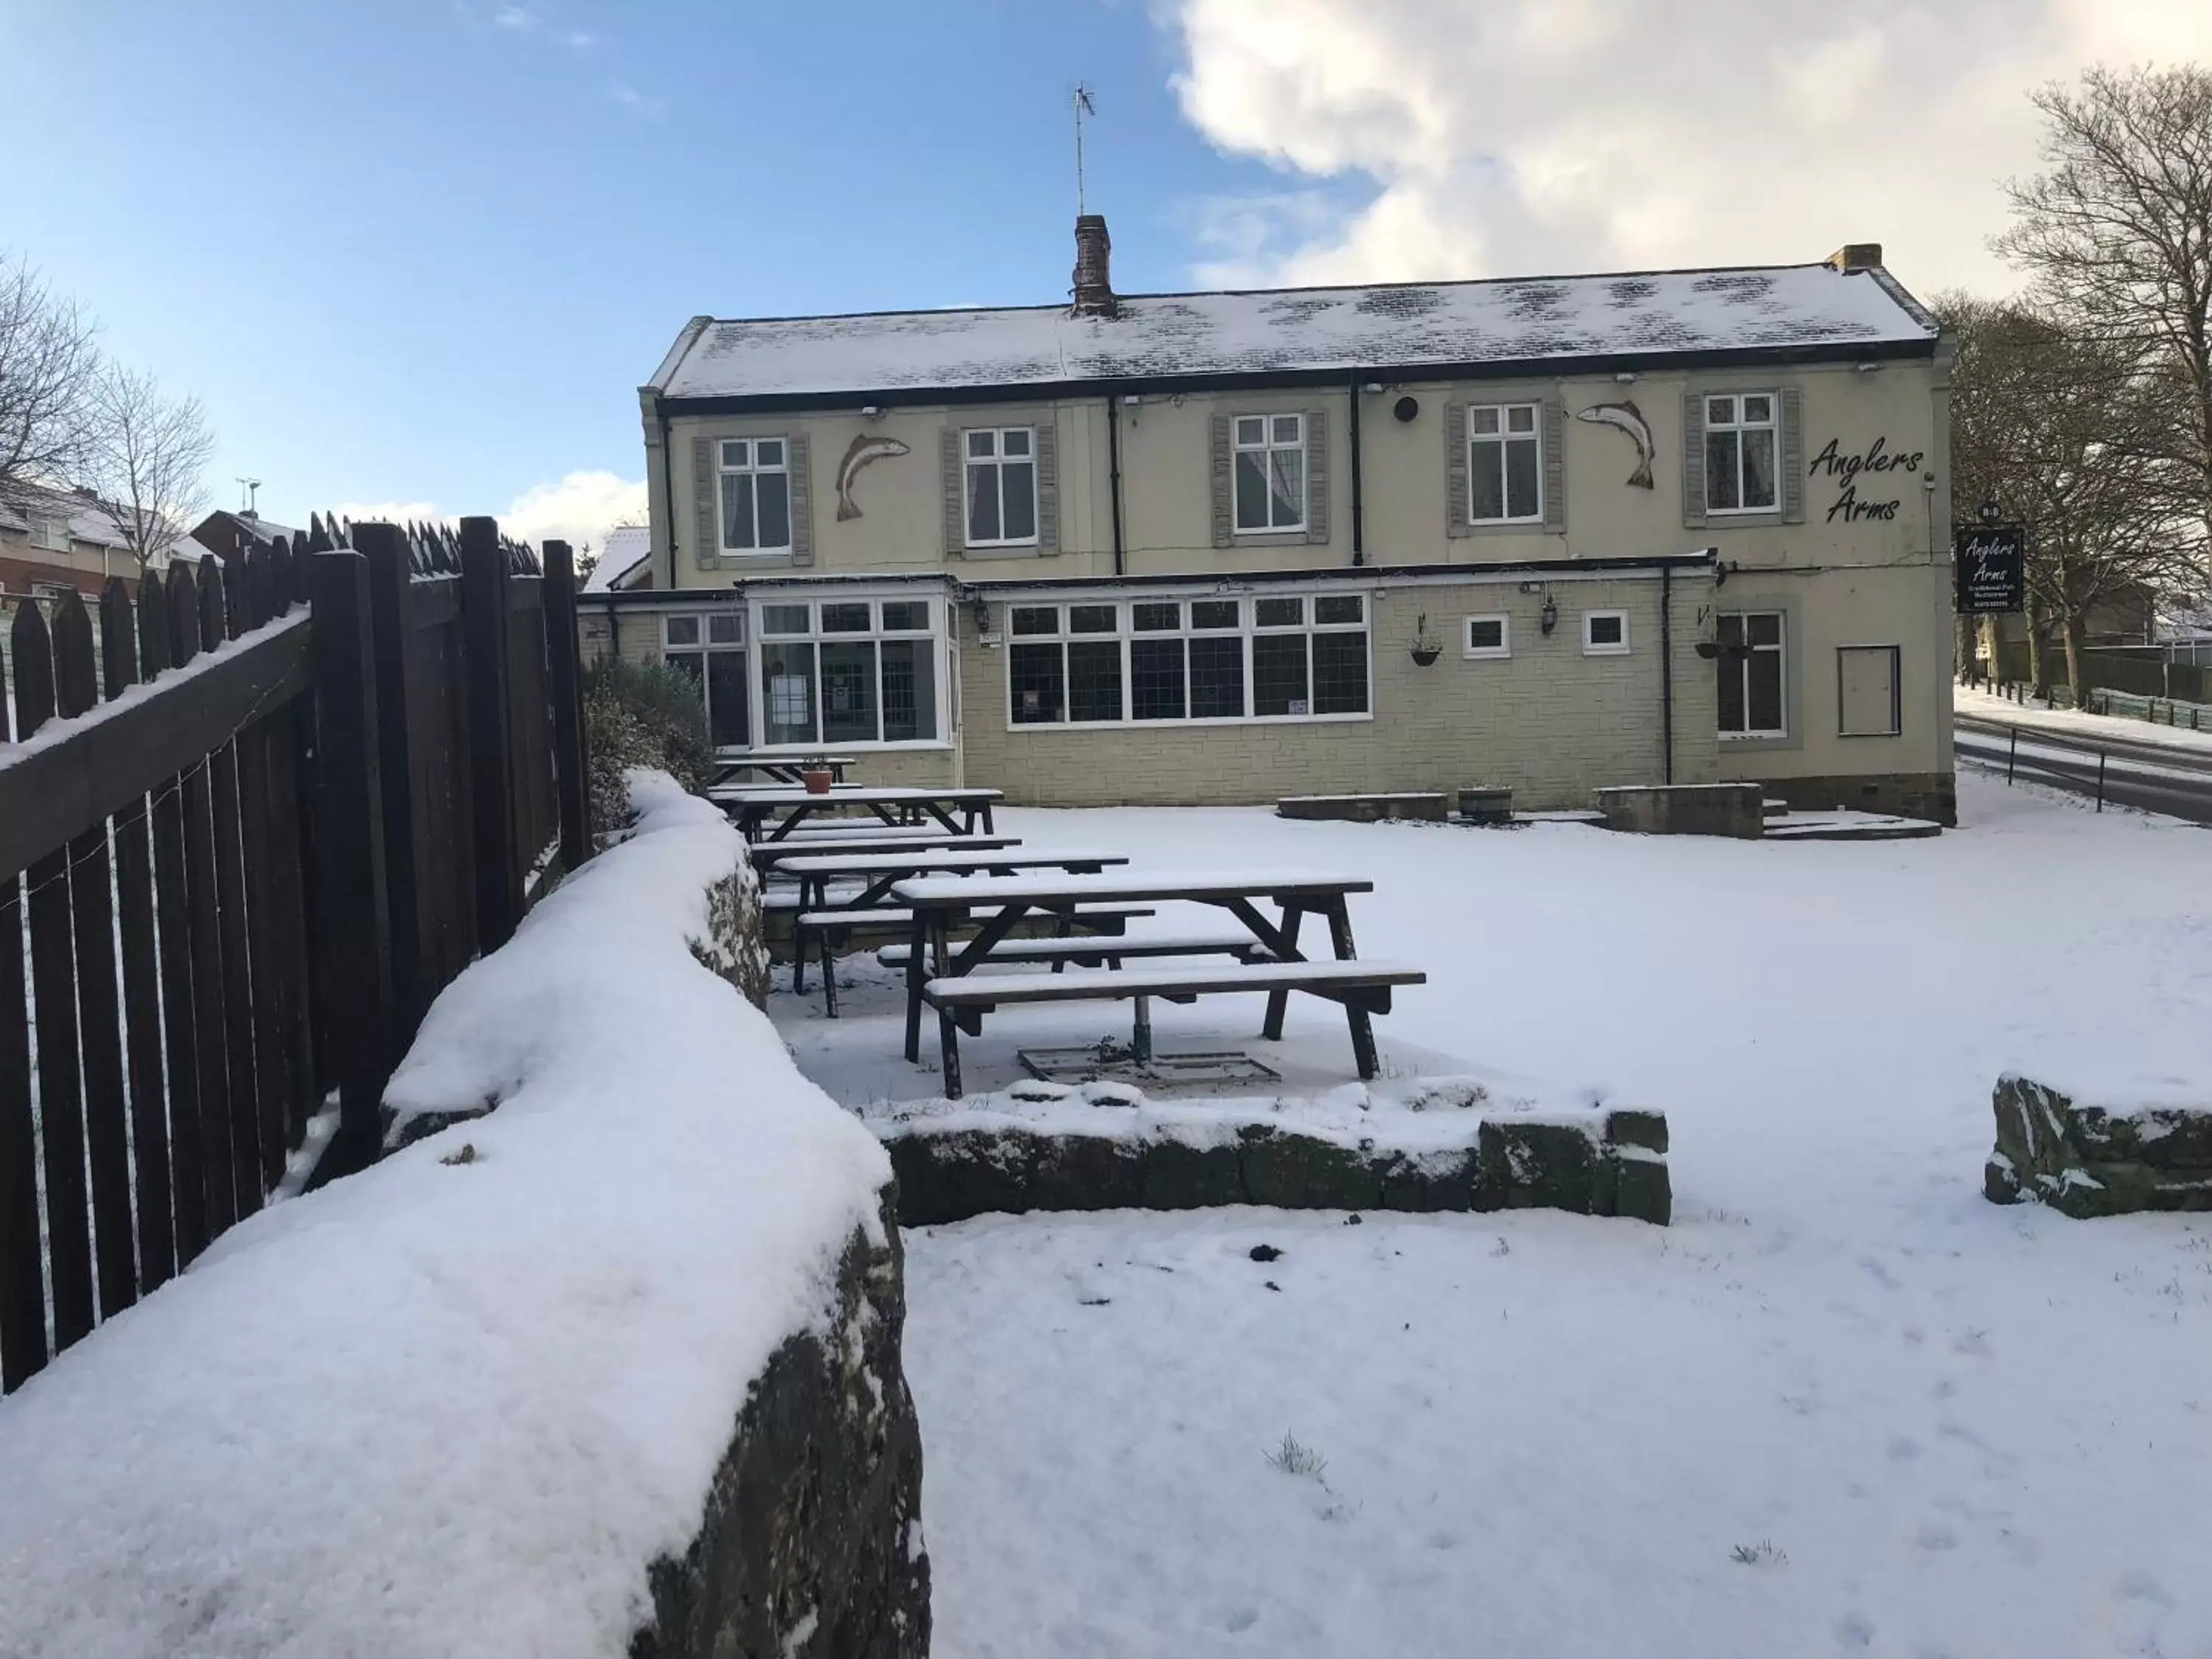 Property building, Winter in Anglers Arms